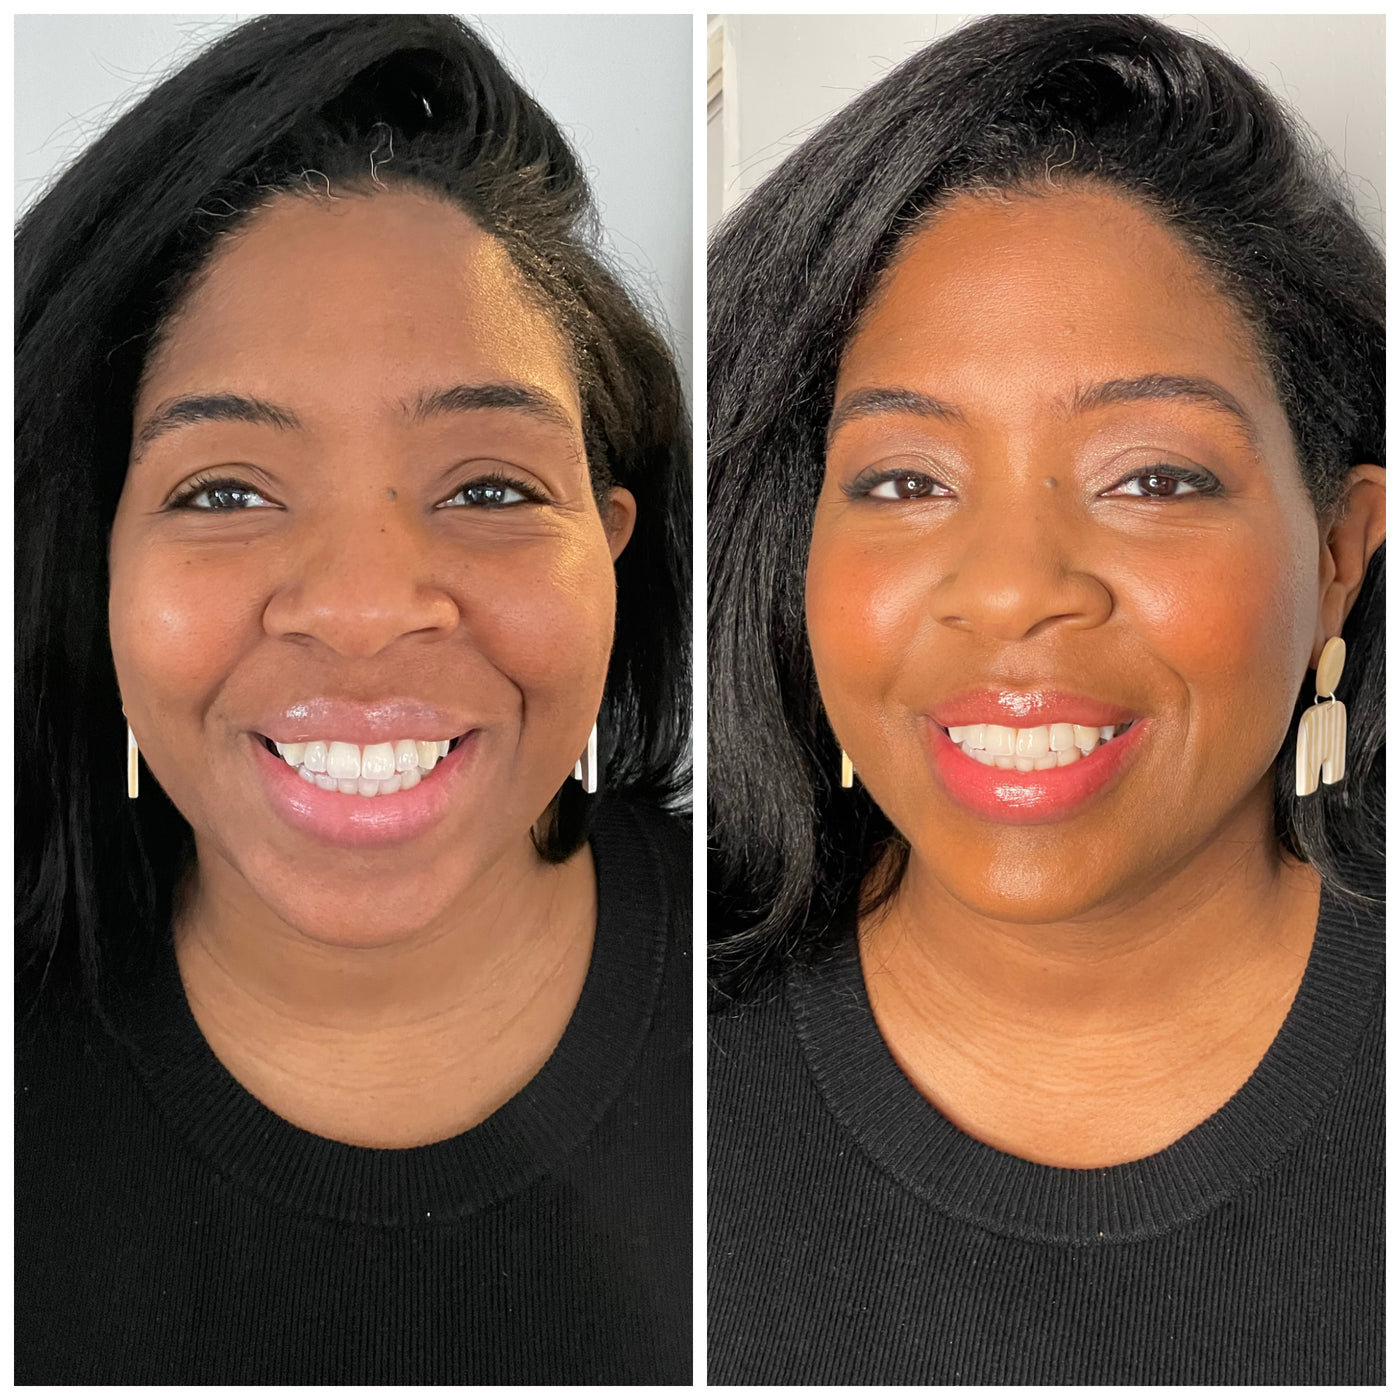 MAKEUP OVER 40 WORKSHOP with Erin - in person